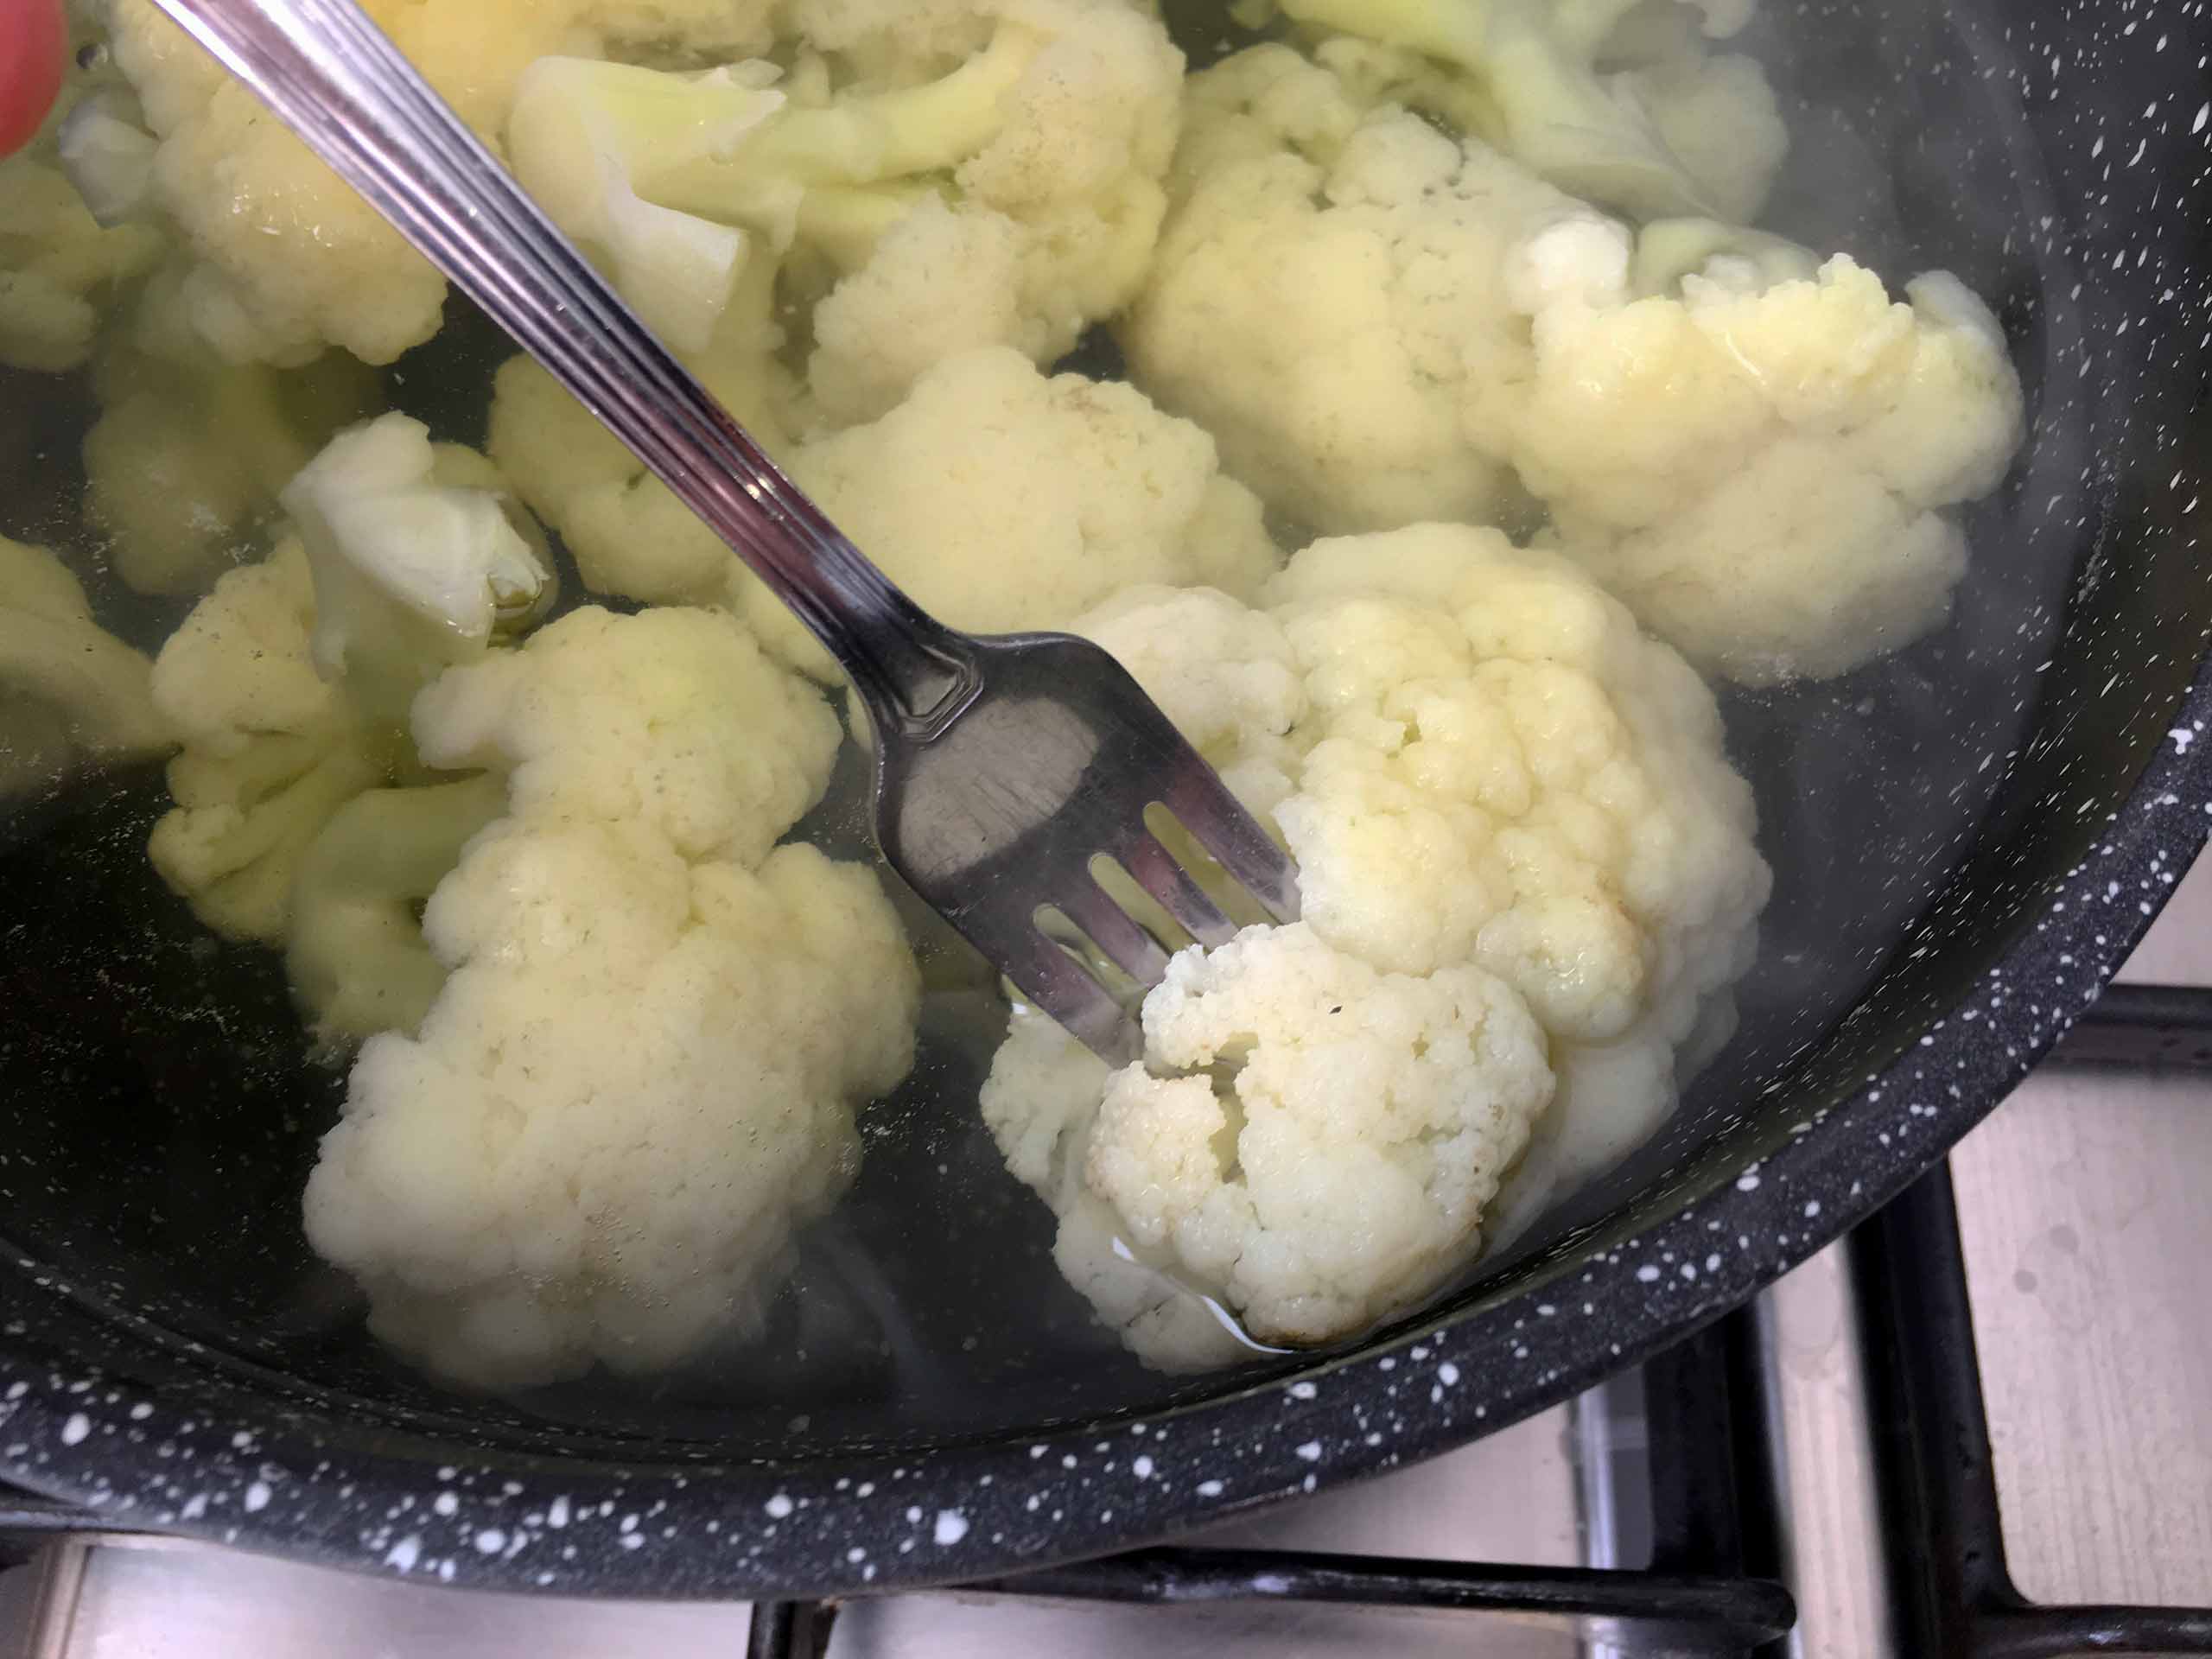 Check the cauliflower with a fork